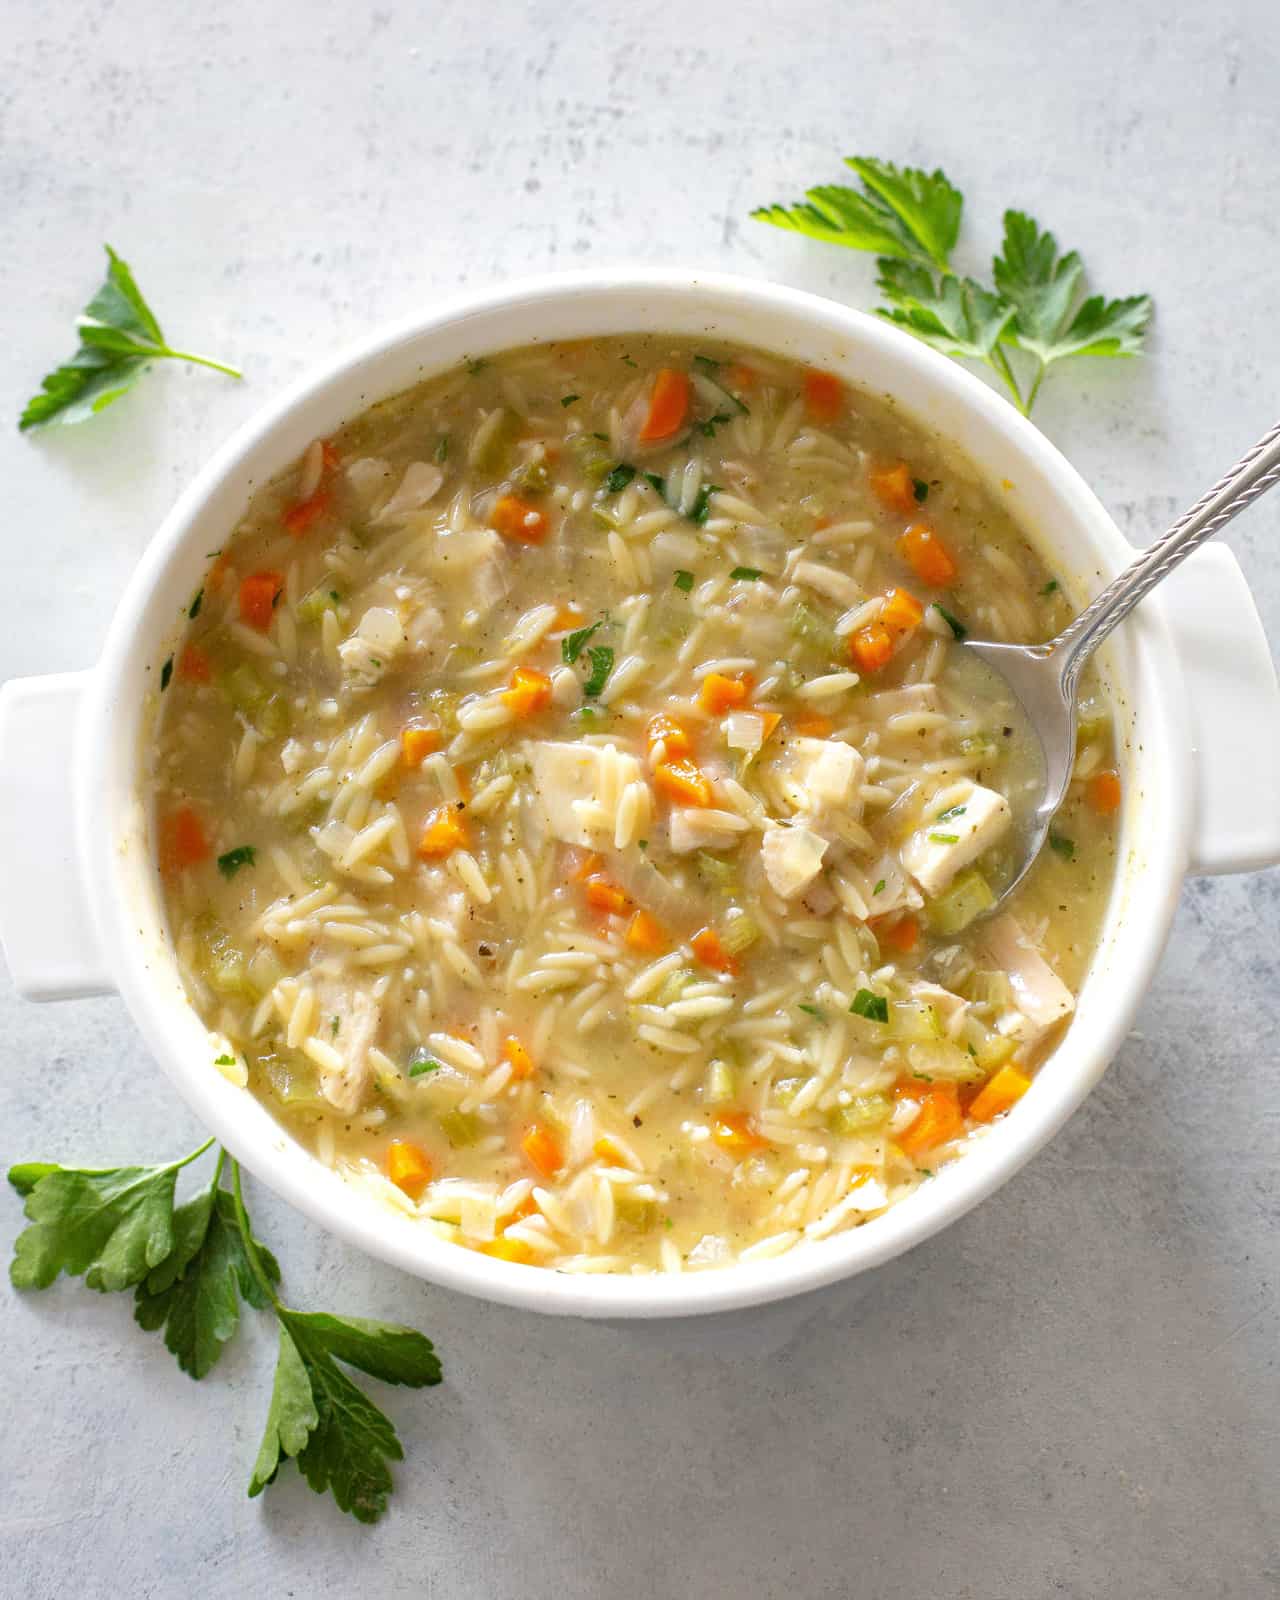 Lemon Chicken Orzo Soup Recipe - The Girl Who Ate Everything